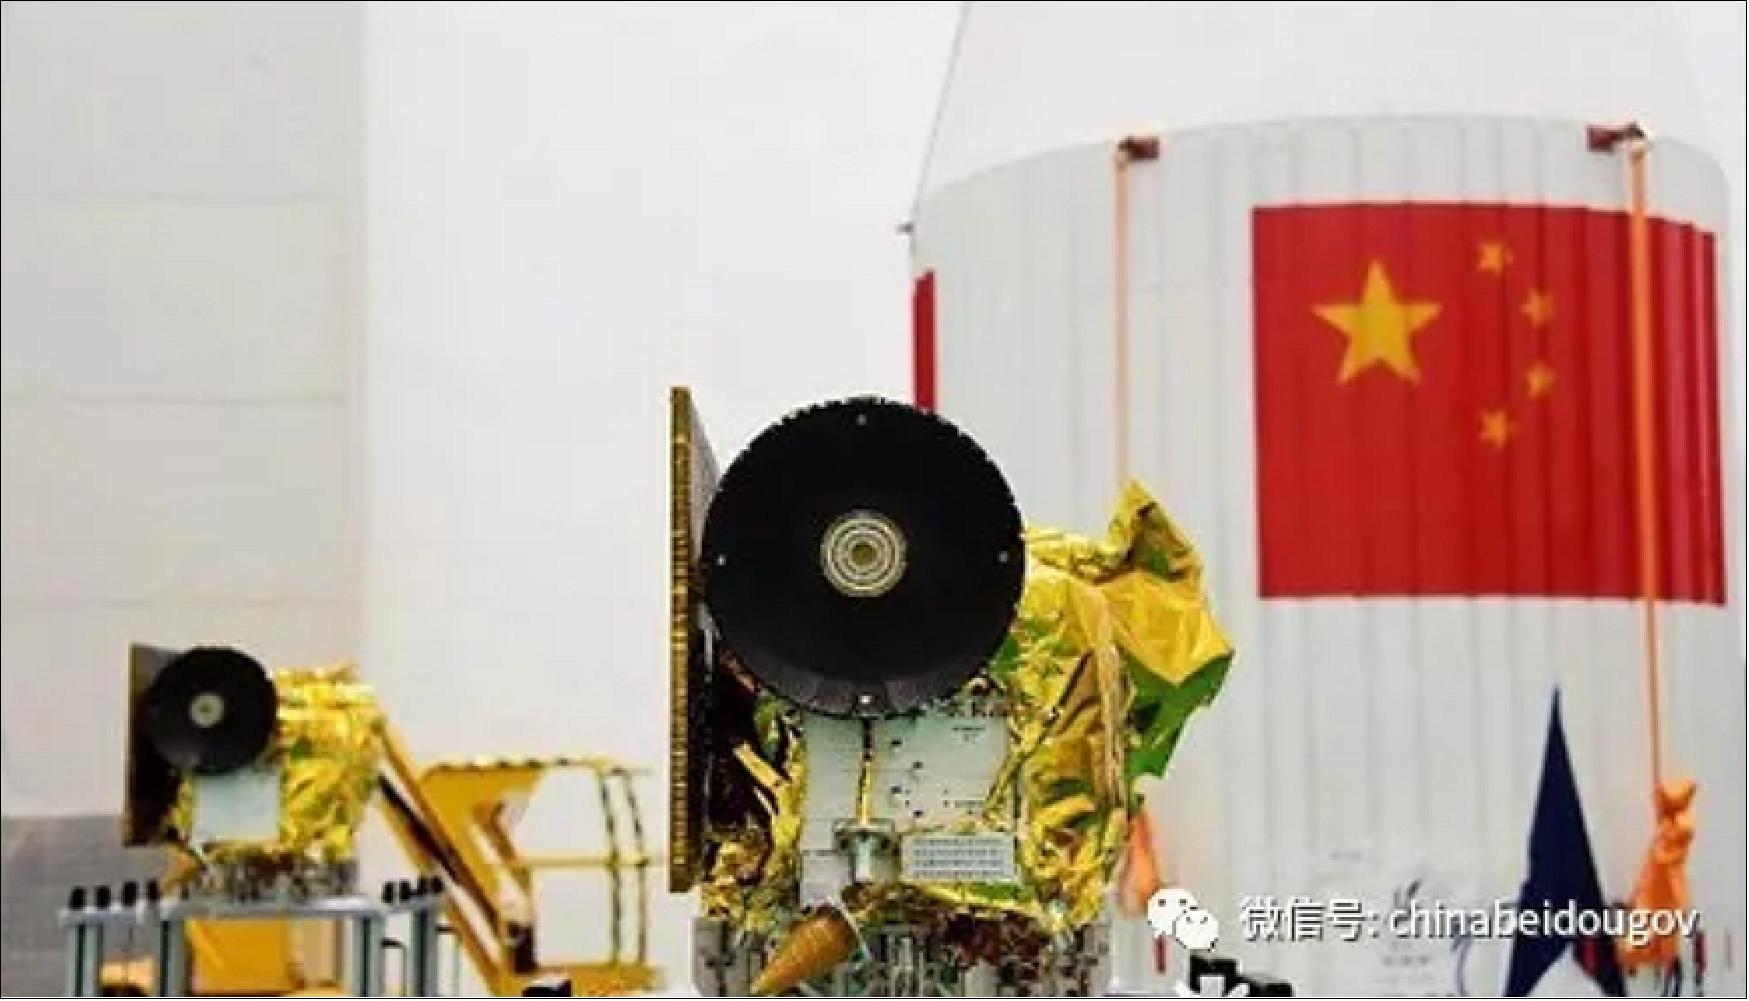 Figure 44: Photo of the Longjiang-1 and -2 microsatellites at the launch site, which were launched to the Moon with the Queqiao/Chang'e-4 lunar relay satellite on May 20, 2018 (image credit: Harbin Institute of Technology)